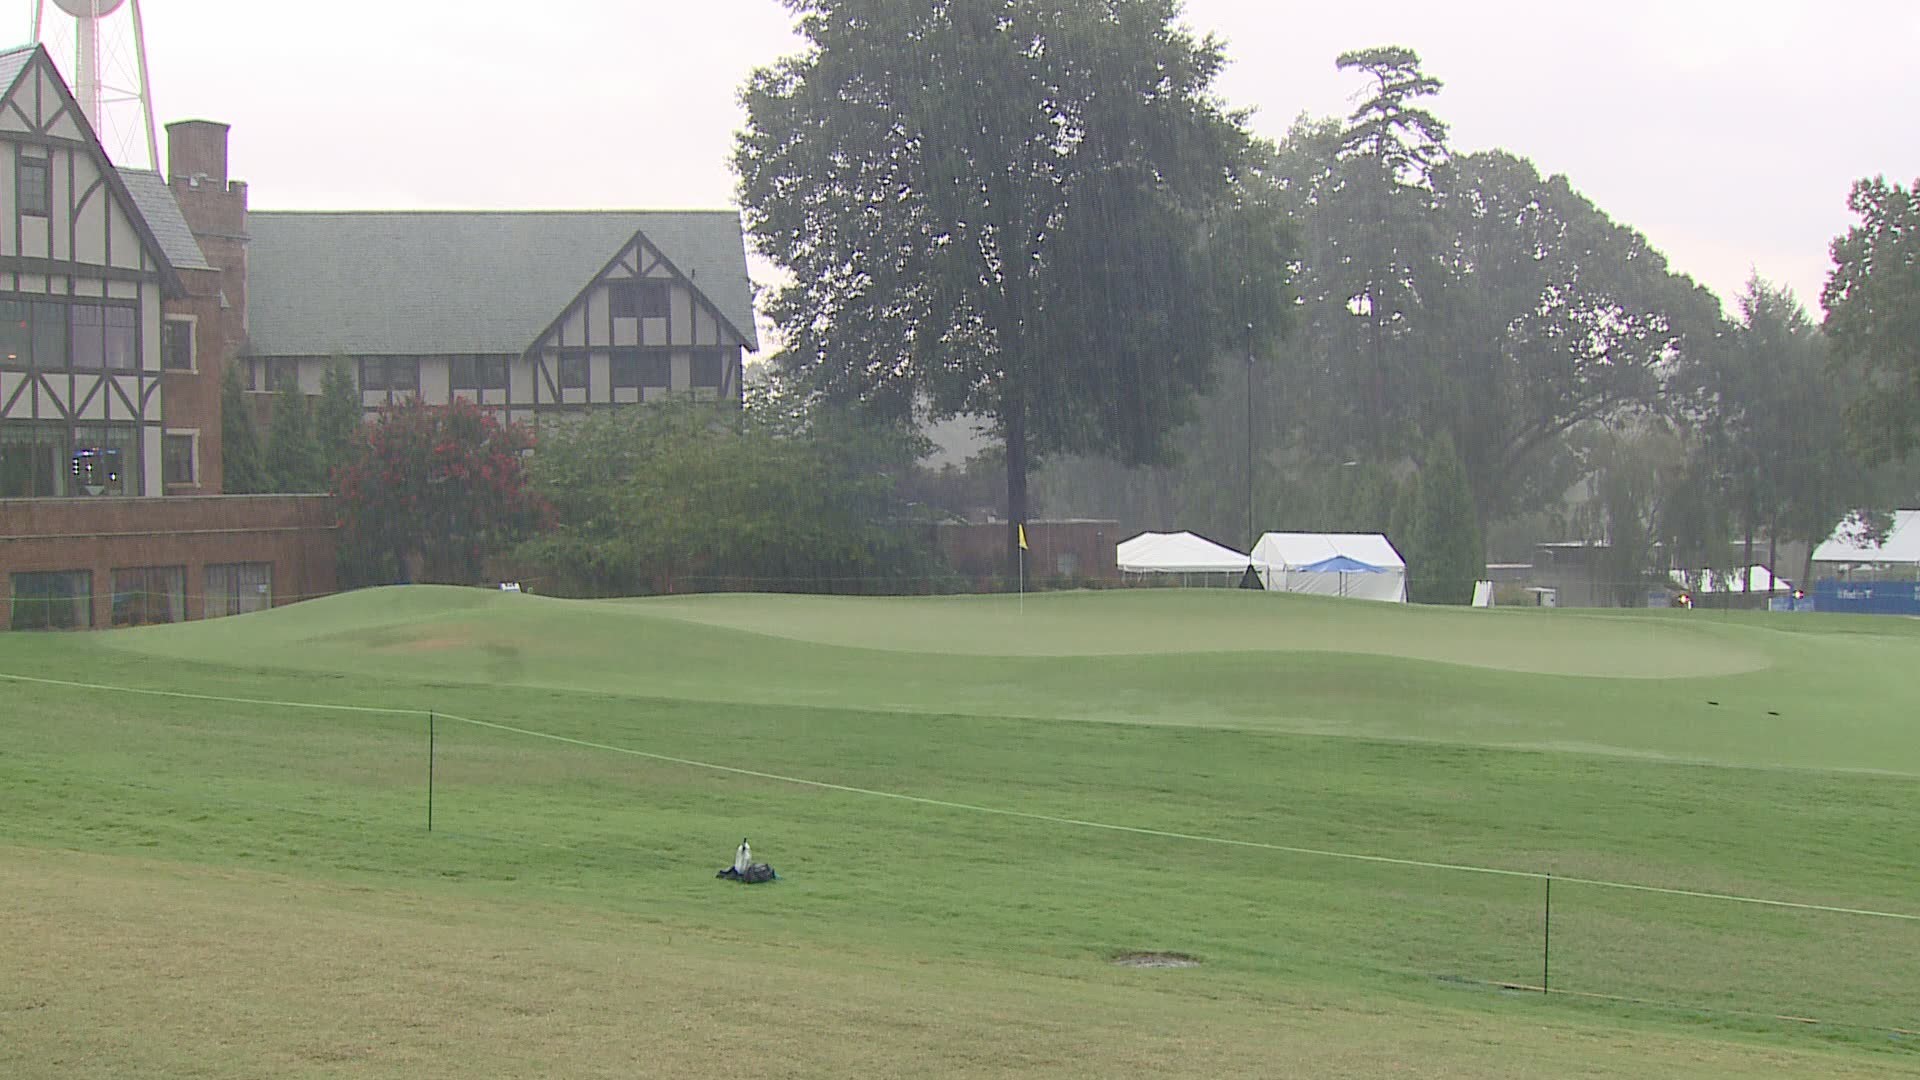 The Wyndham Championship is underway at the Sedgefield Country Club. Play was suspended Thursday due to rain.